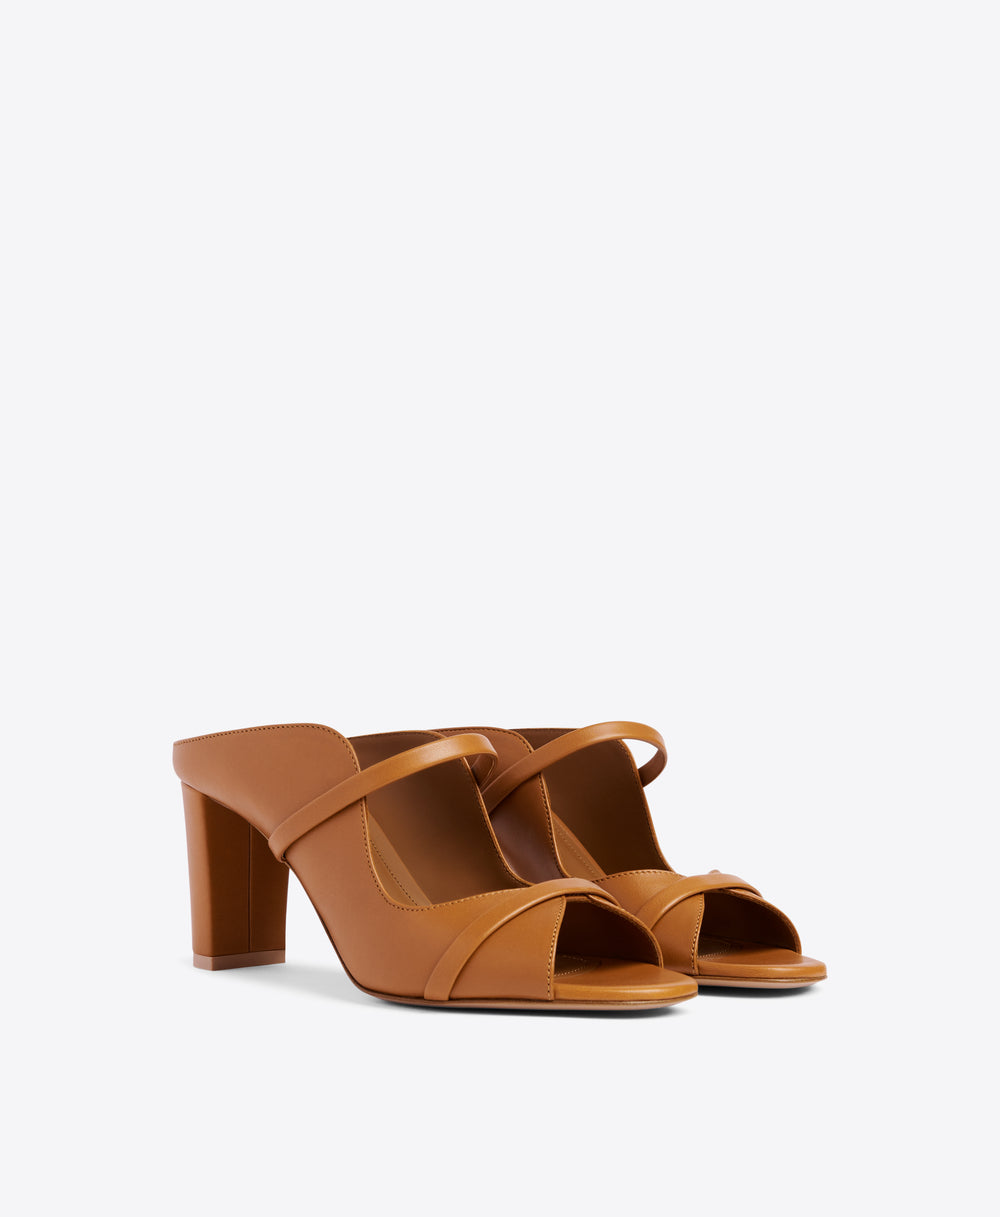 Malone Souliers Norah 70mm Brown Leather Heeled Sandals